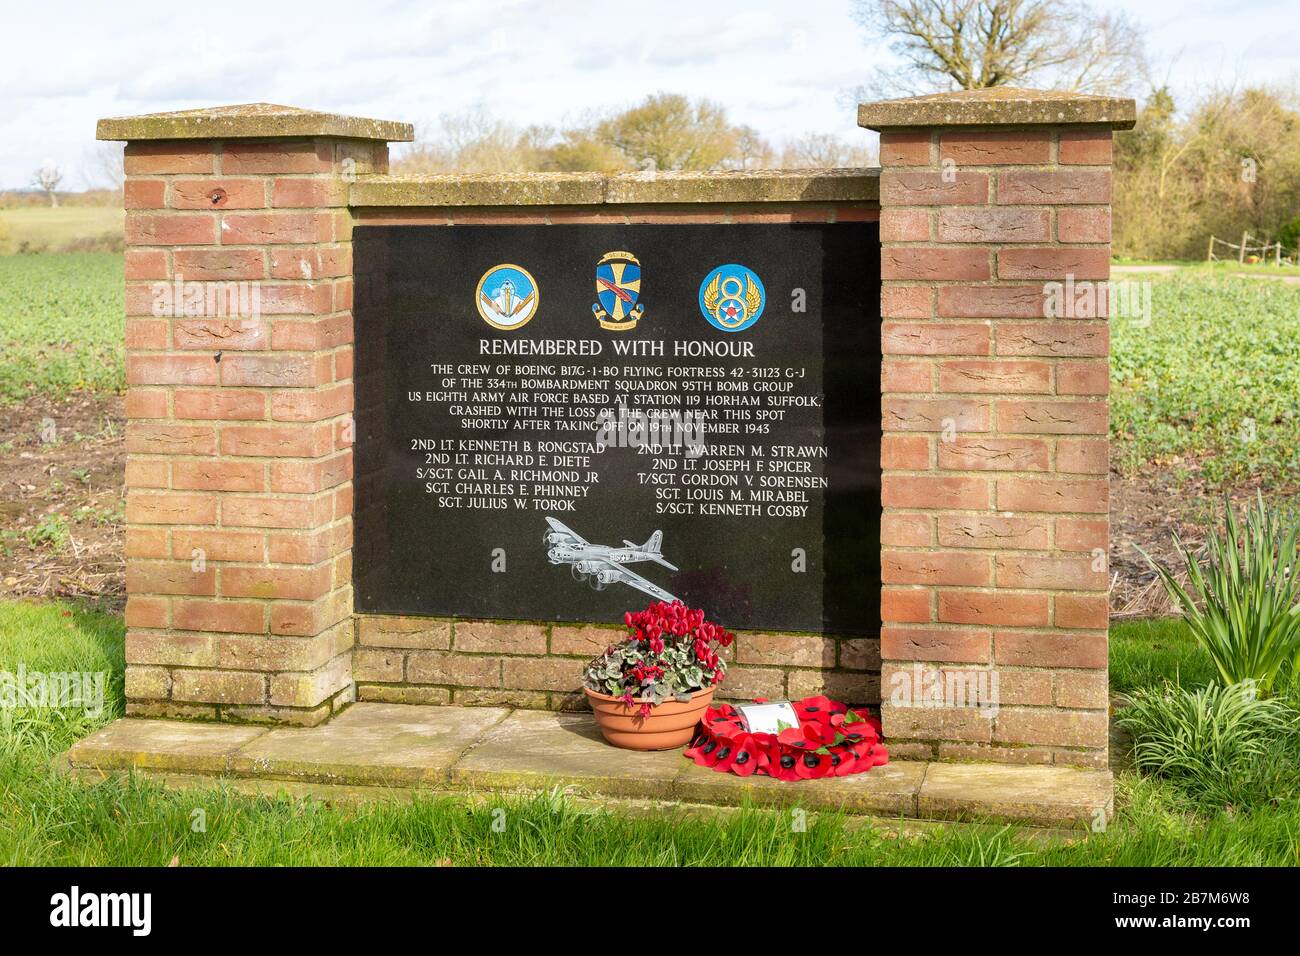 Second world war air crash memorial site monument, Redlingfield, Suffolk, England, UK - crew of Boeing Flying Fortress of the 334th bombardment squadron, 95th bomb group, UD eighth army Air Force based at station 119 Horham Suffolk, crash on 19th November 1943 Stock Photo